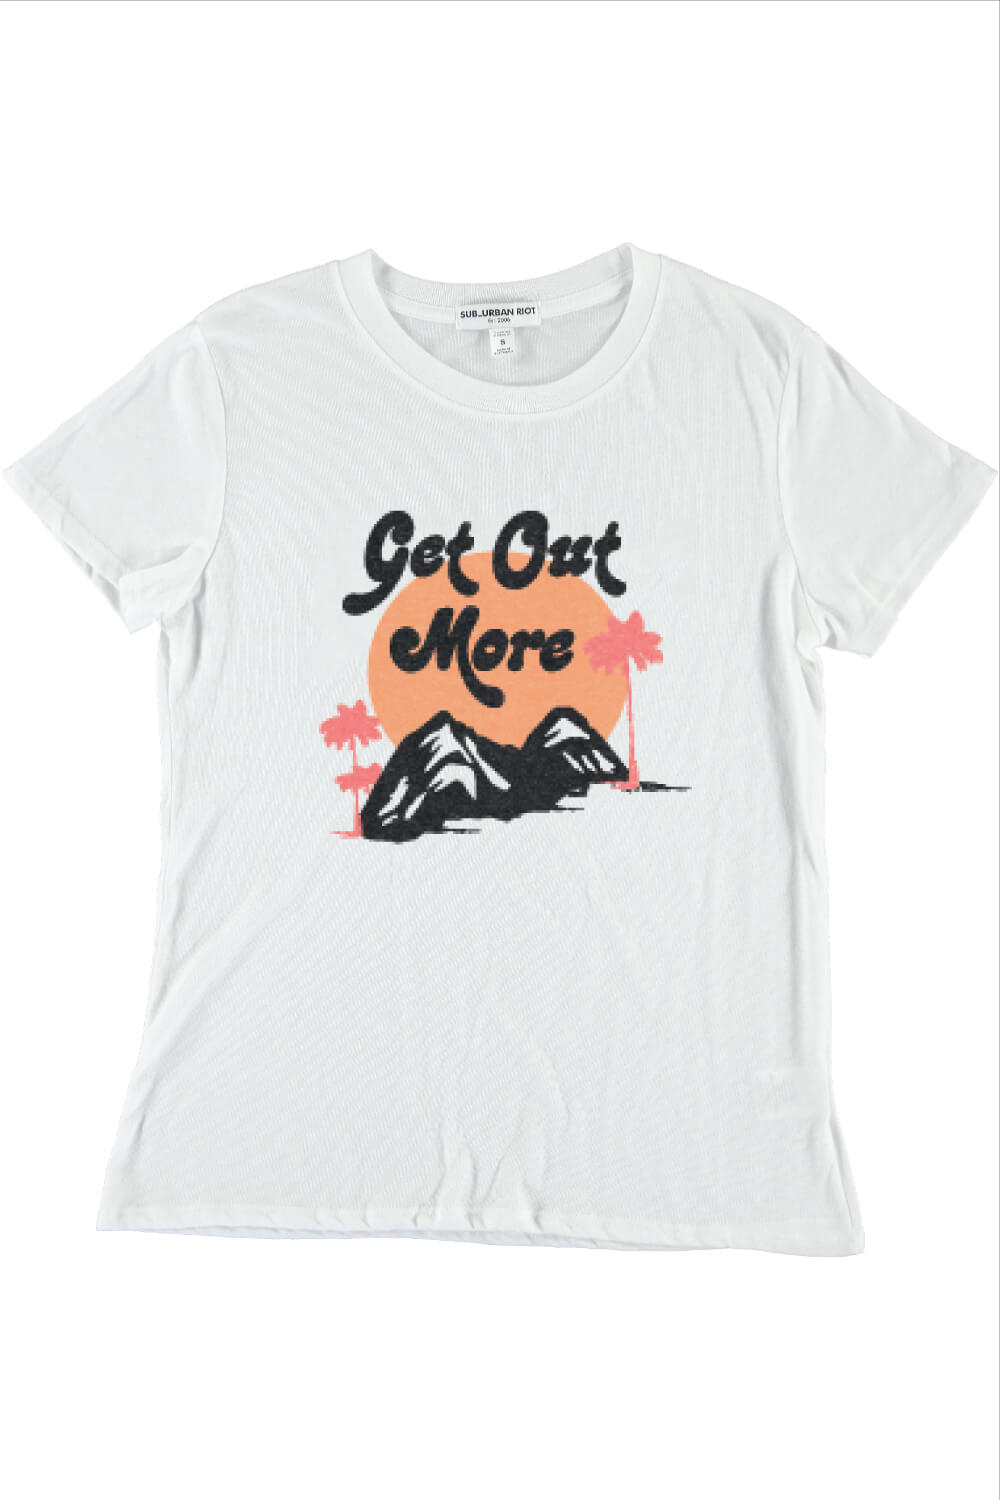 GET OUT MORE YOUTH SIZE LOOSE TEE